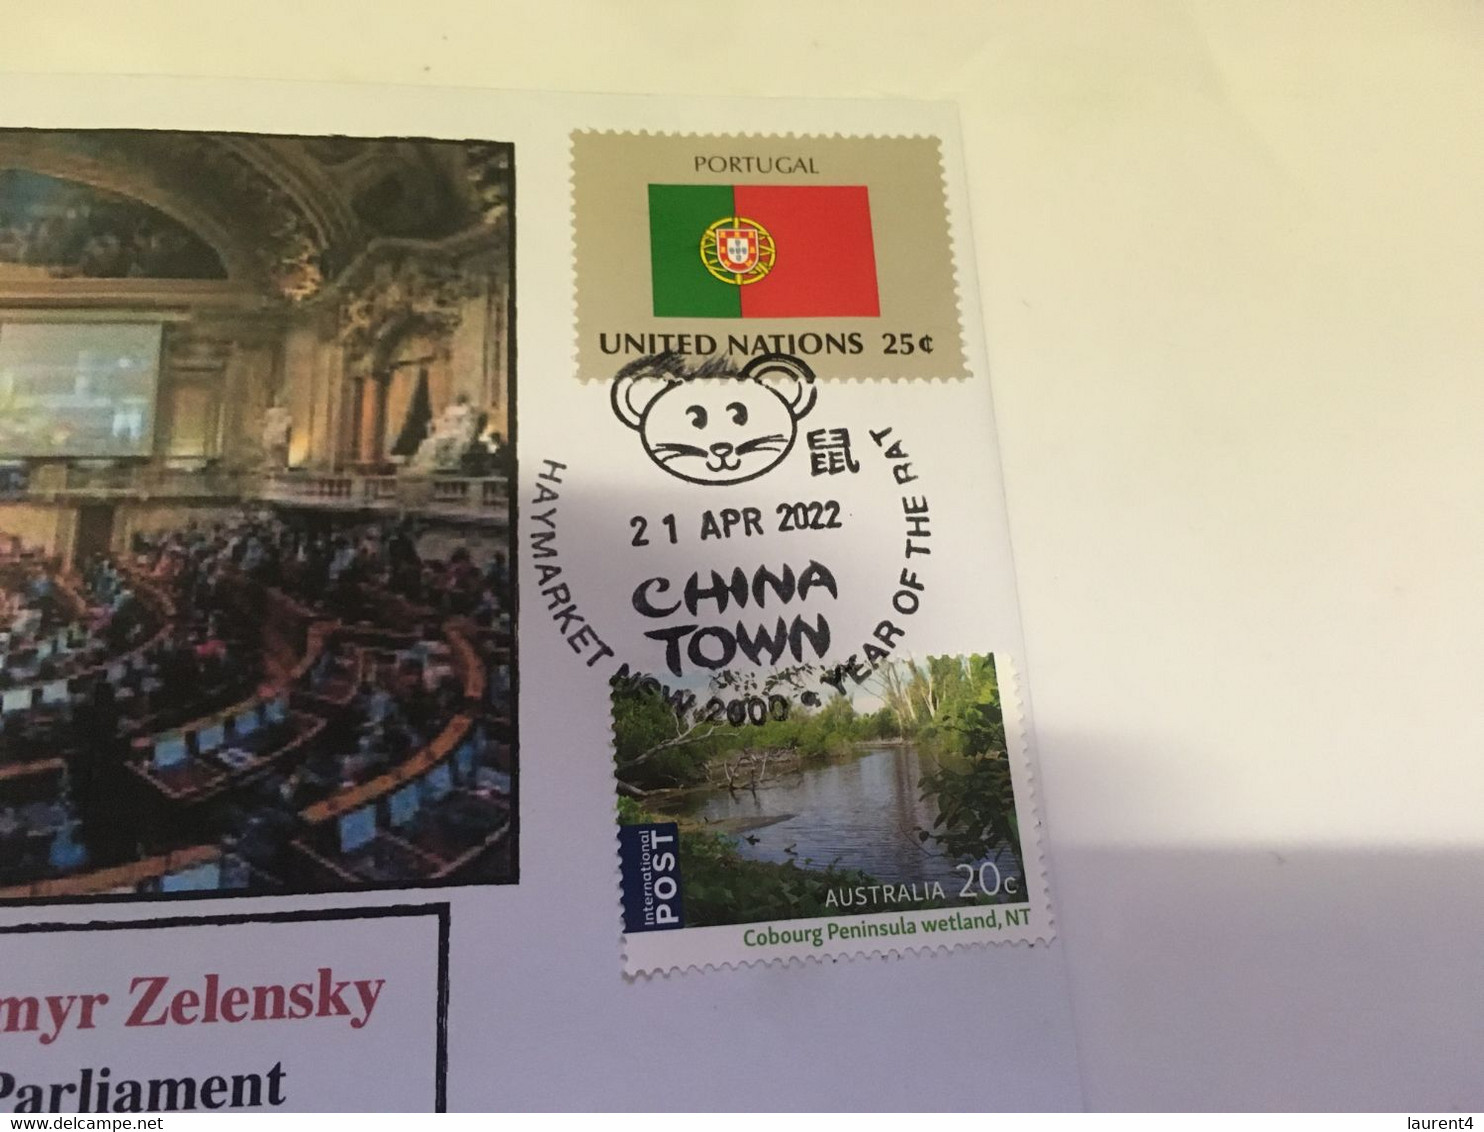 (3 H 28) UKRAINE President Address To Portugal Parliament (21st April 2022) With OZ Map Stamp + Portugal Flag Stamp - Lettres & Documents